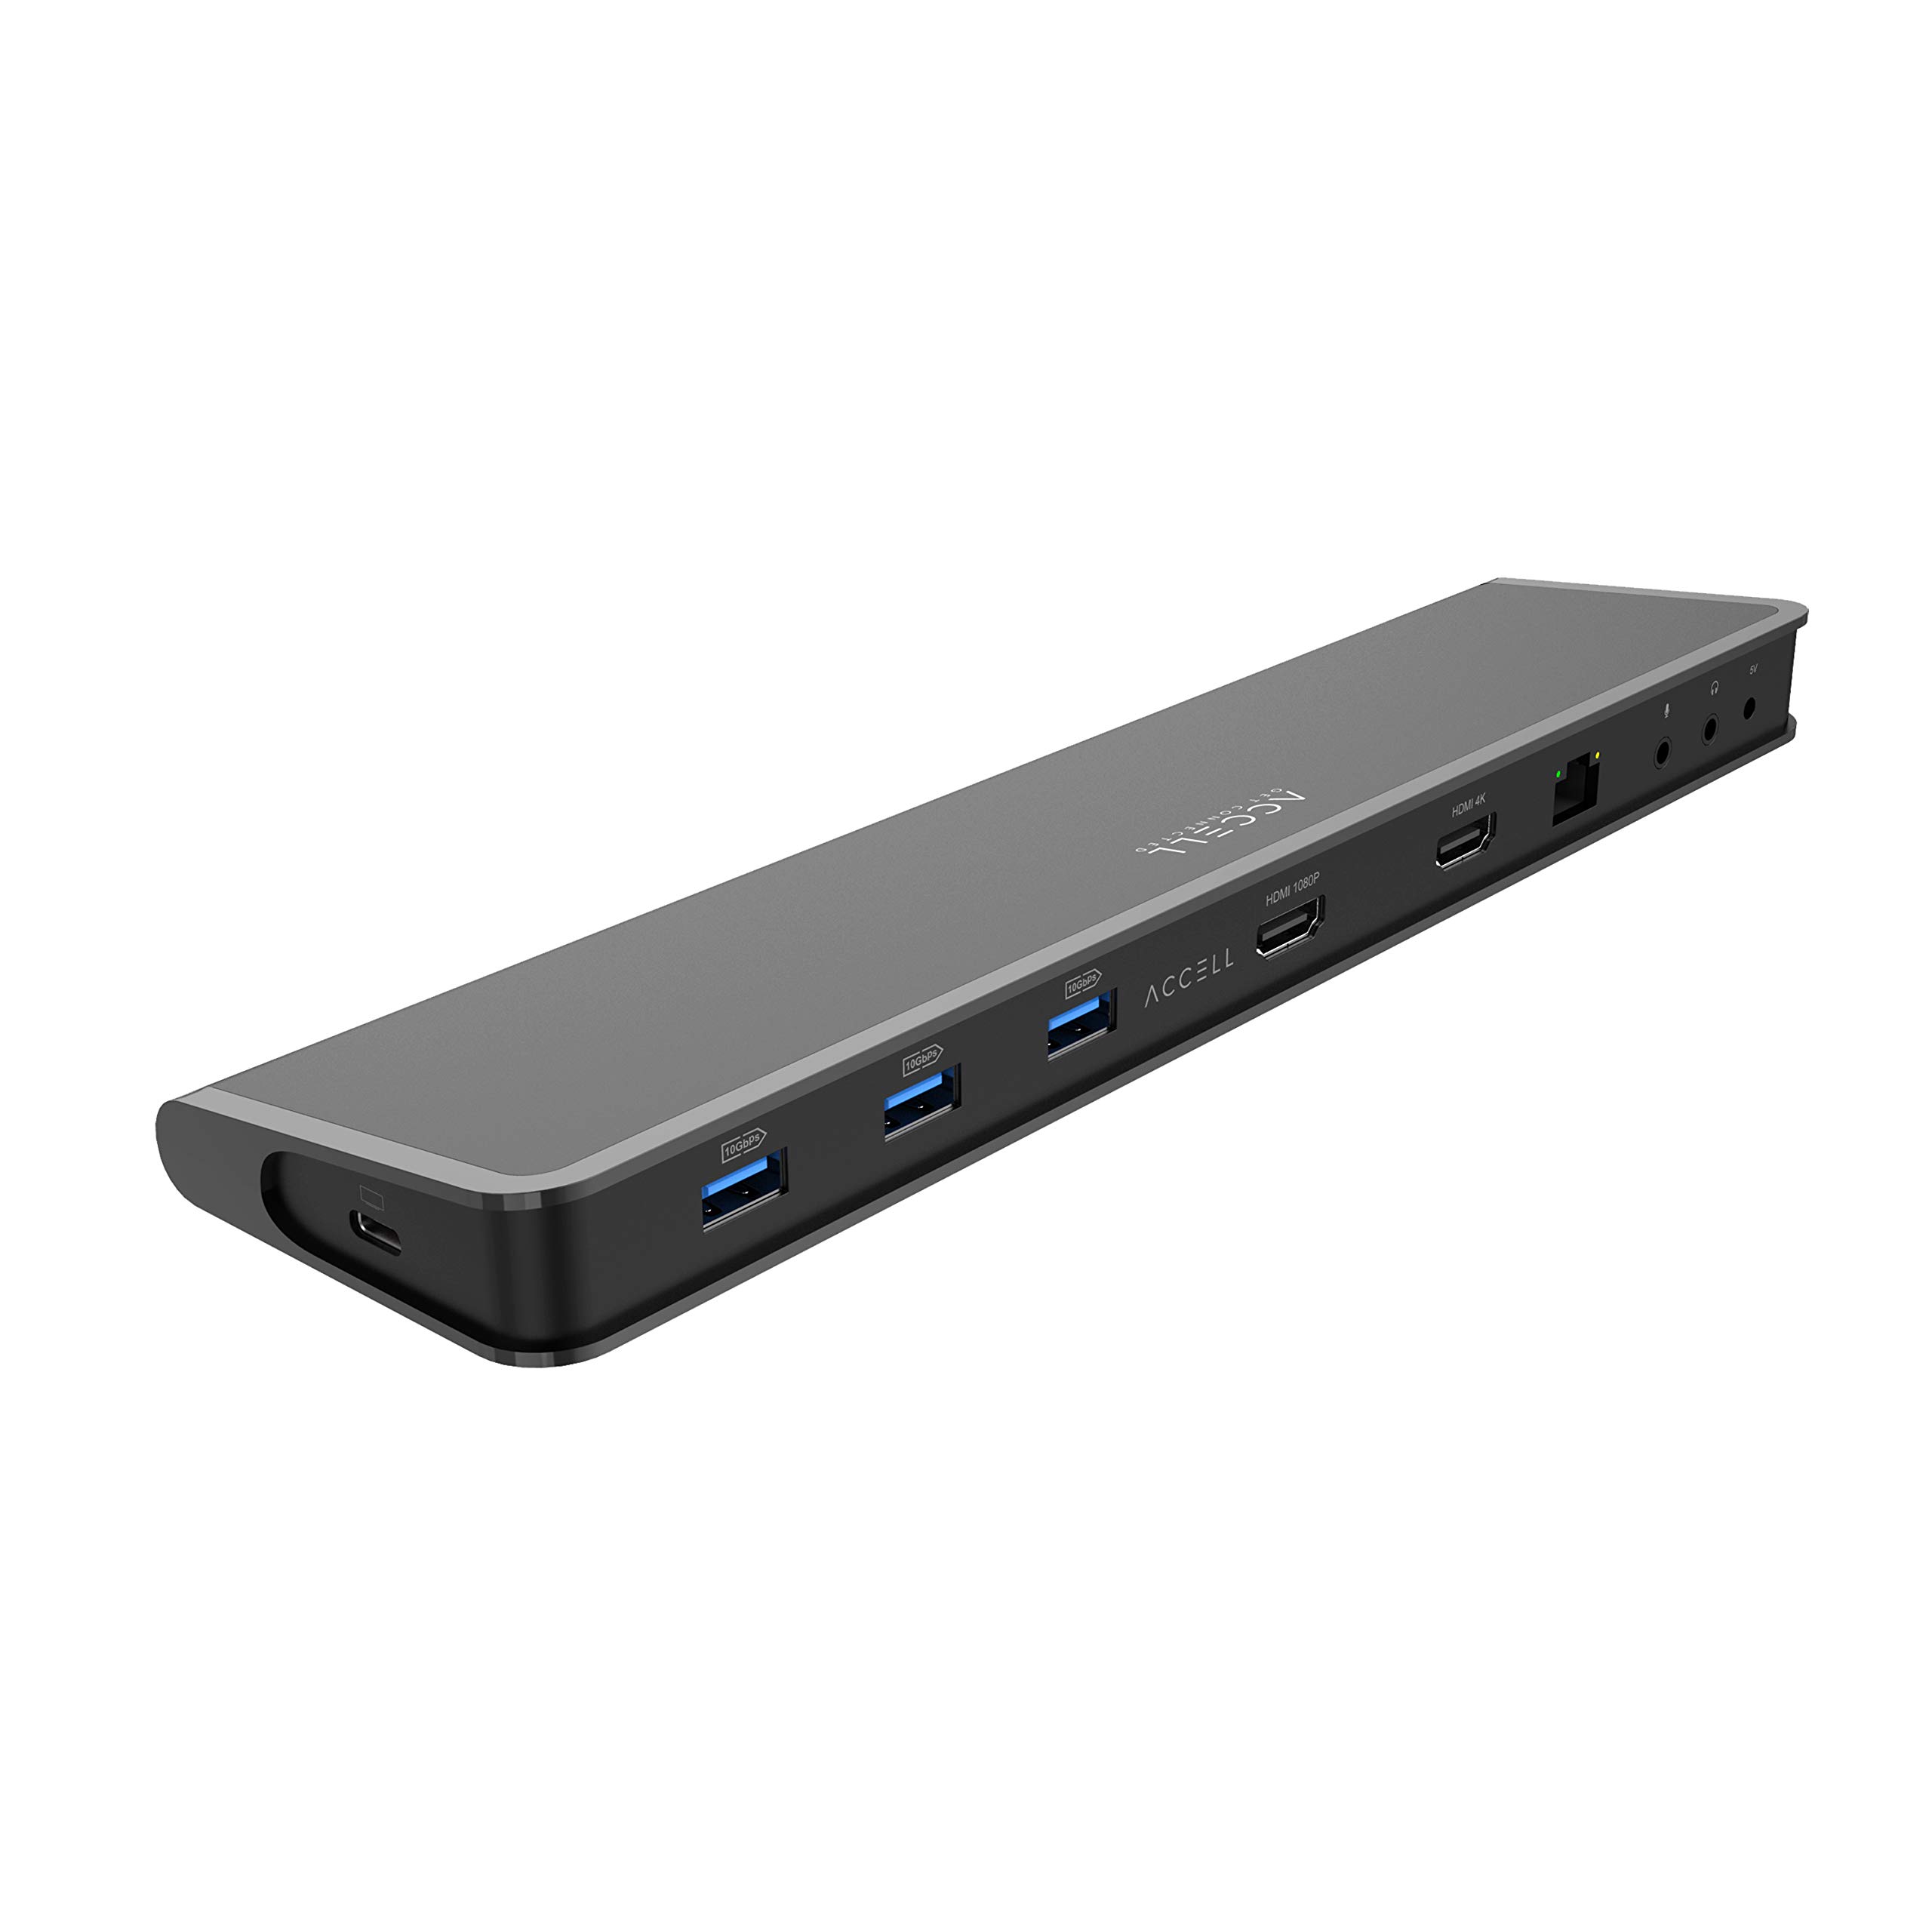 Accell InstantView USB-C 4K Docking Station - 2 HDMI, 3x USB-A 3.1, Ethernet, Audio Ports Compatible with PC, macOS, Android, Chromebook, (K31G2-001B)